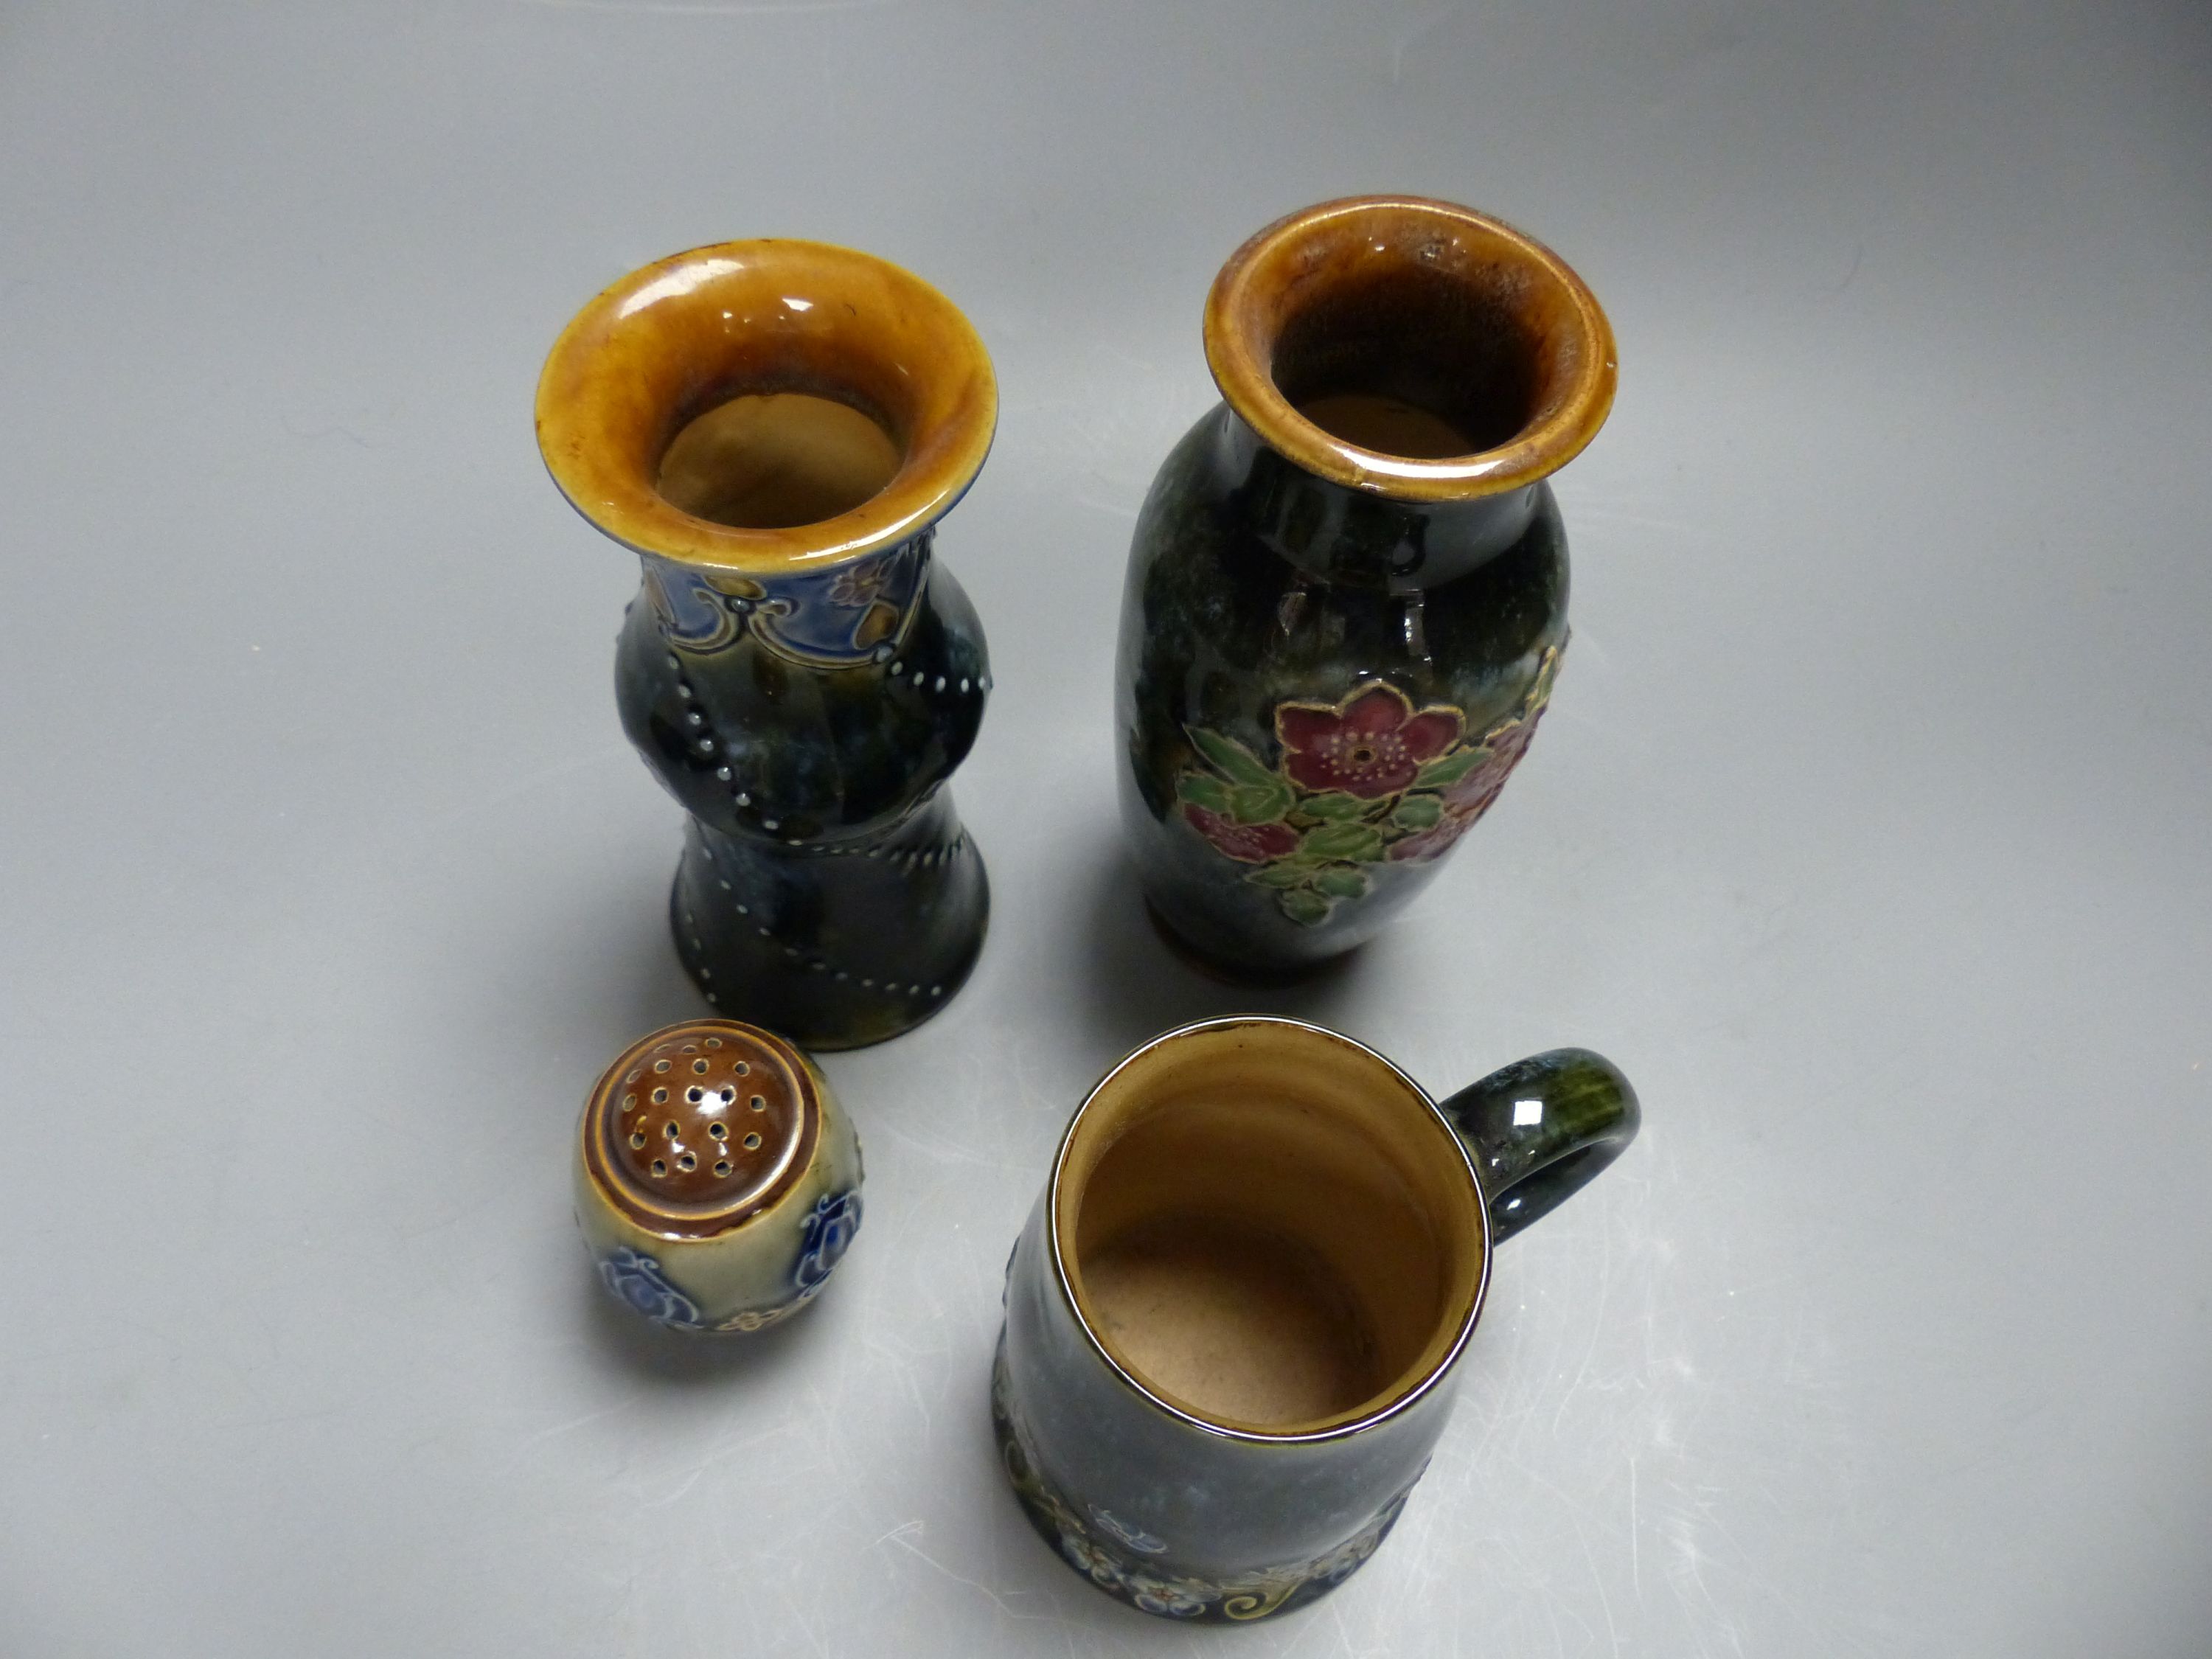 Four pieces of Royal Doulton stoneware including two vases, a mug and a pepperette, tallest 16cm